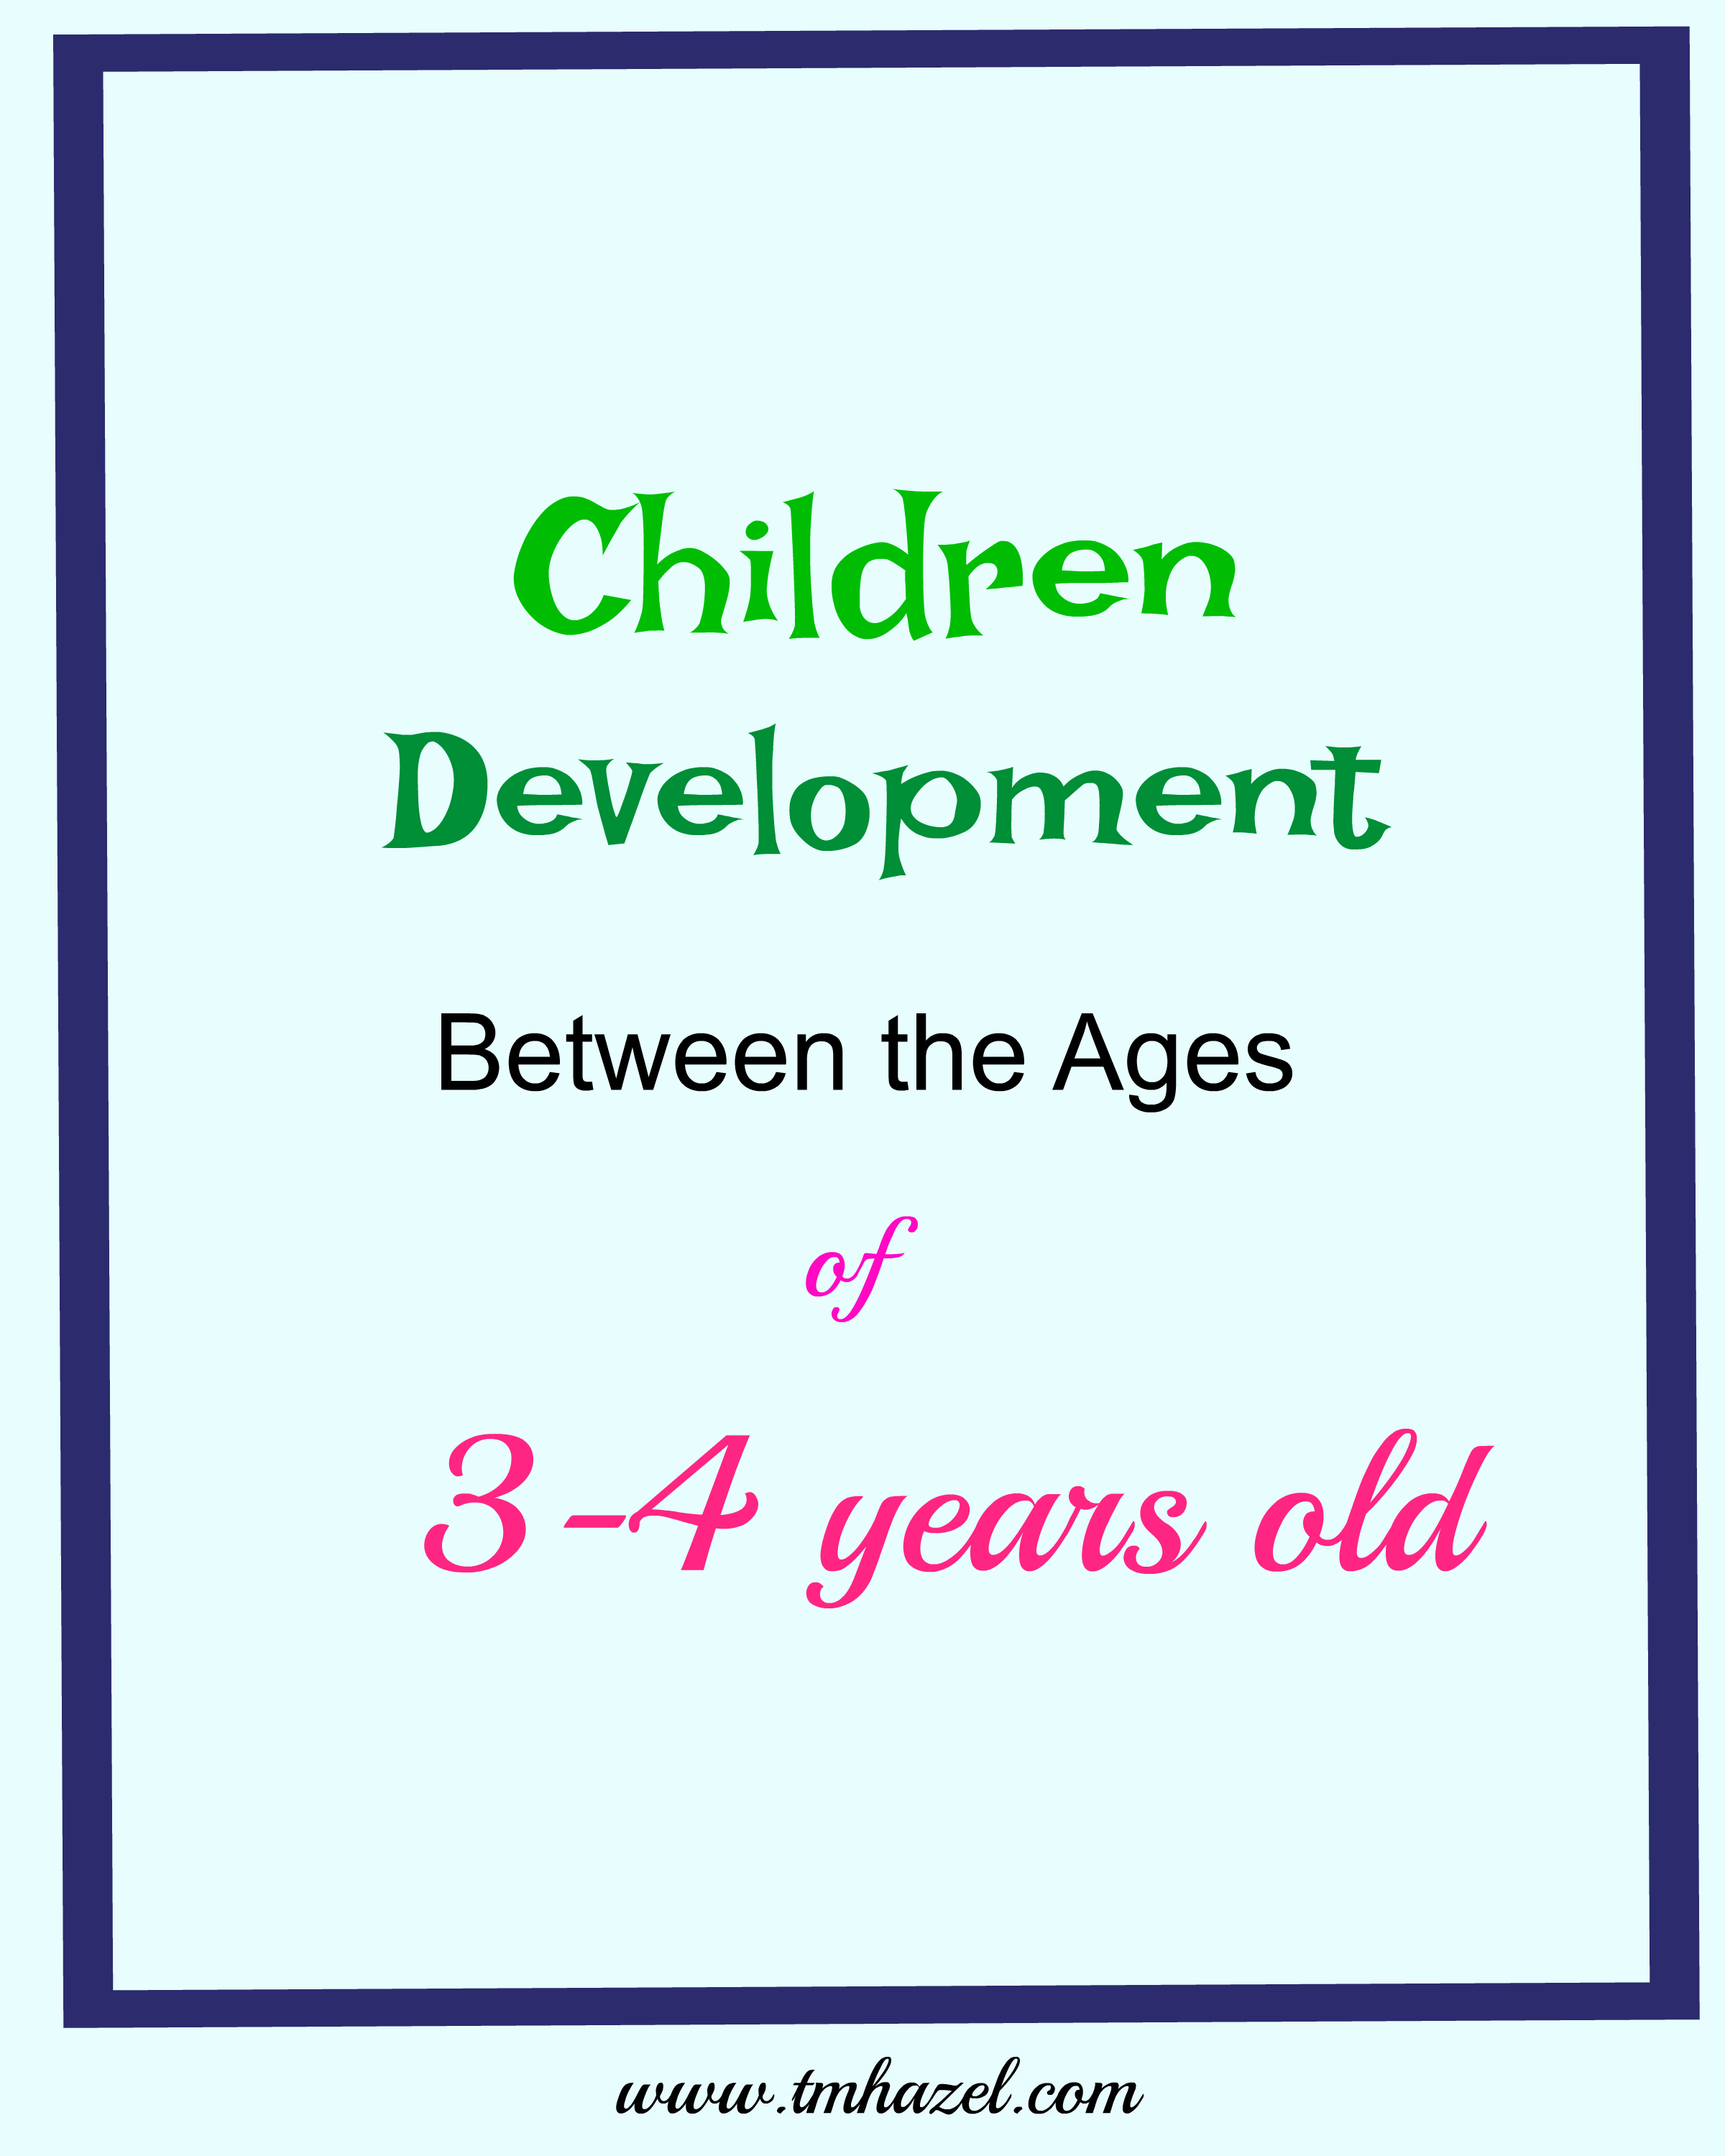 children development between the ages of 3-4 years old